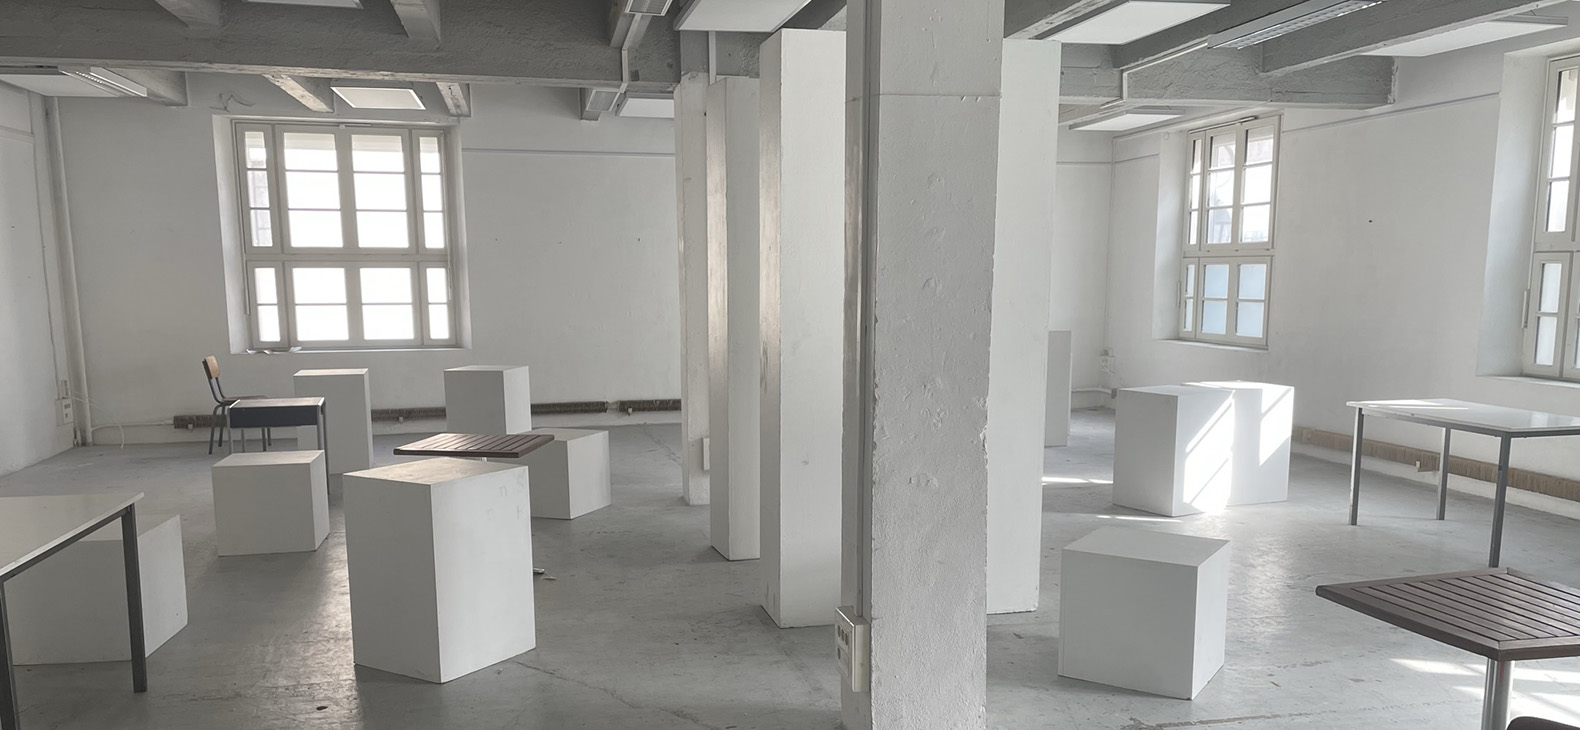 Schafhof Residency Program / District of Upper Bavaria: Focus /> Orléans; Image: Room view of an exhibition space; large white cubes and cuboids distributed in the room.